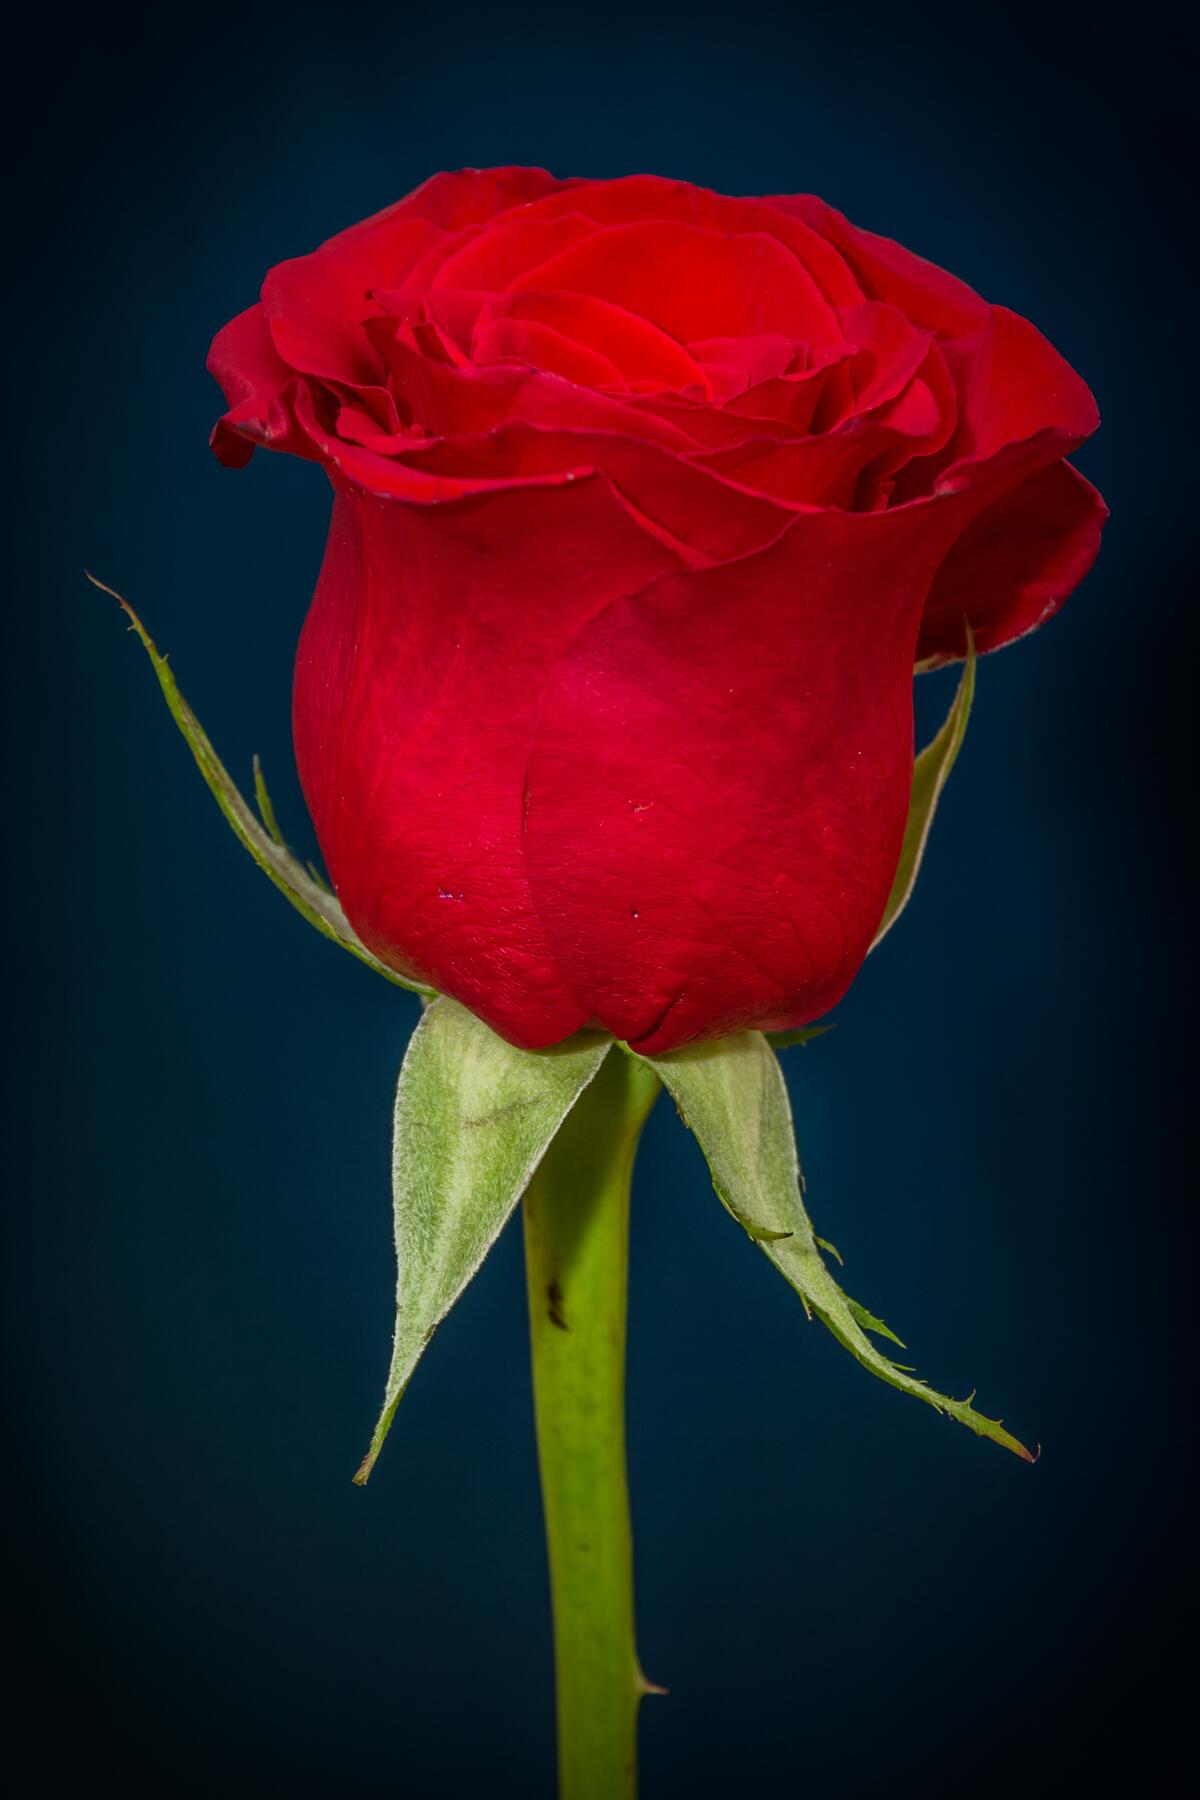 A single red rose on a dark background